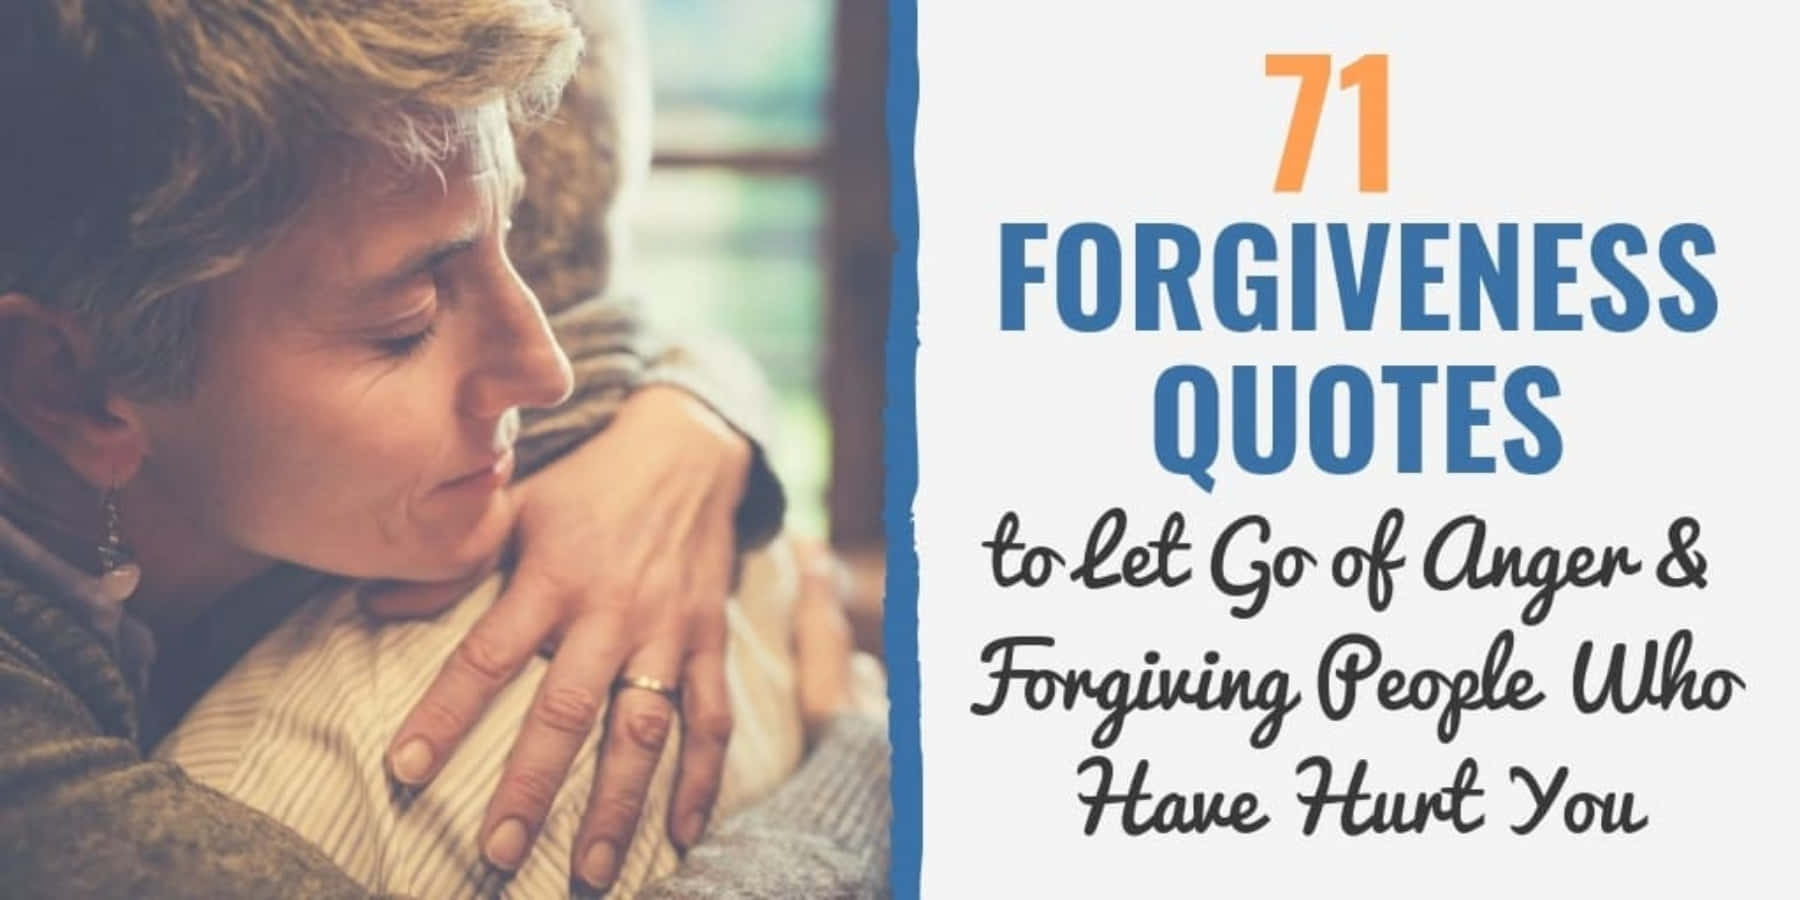 Forgiveness is the key to peace and healing